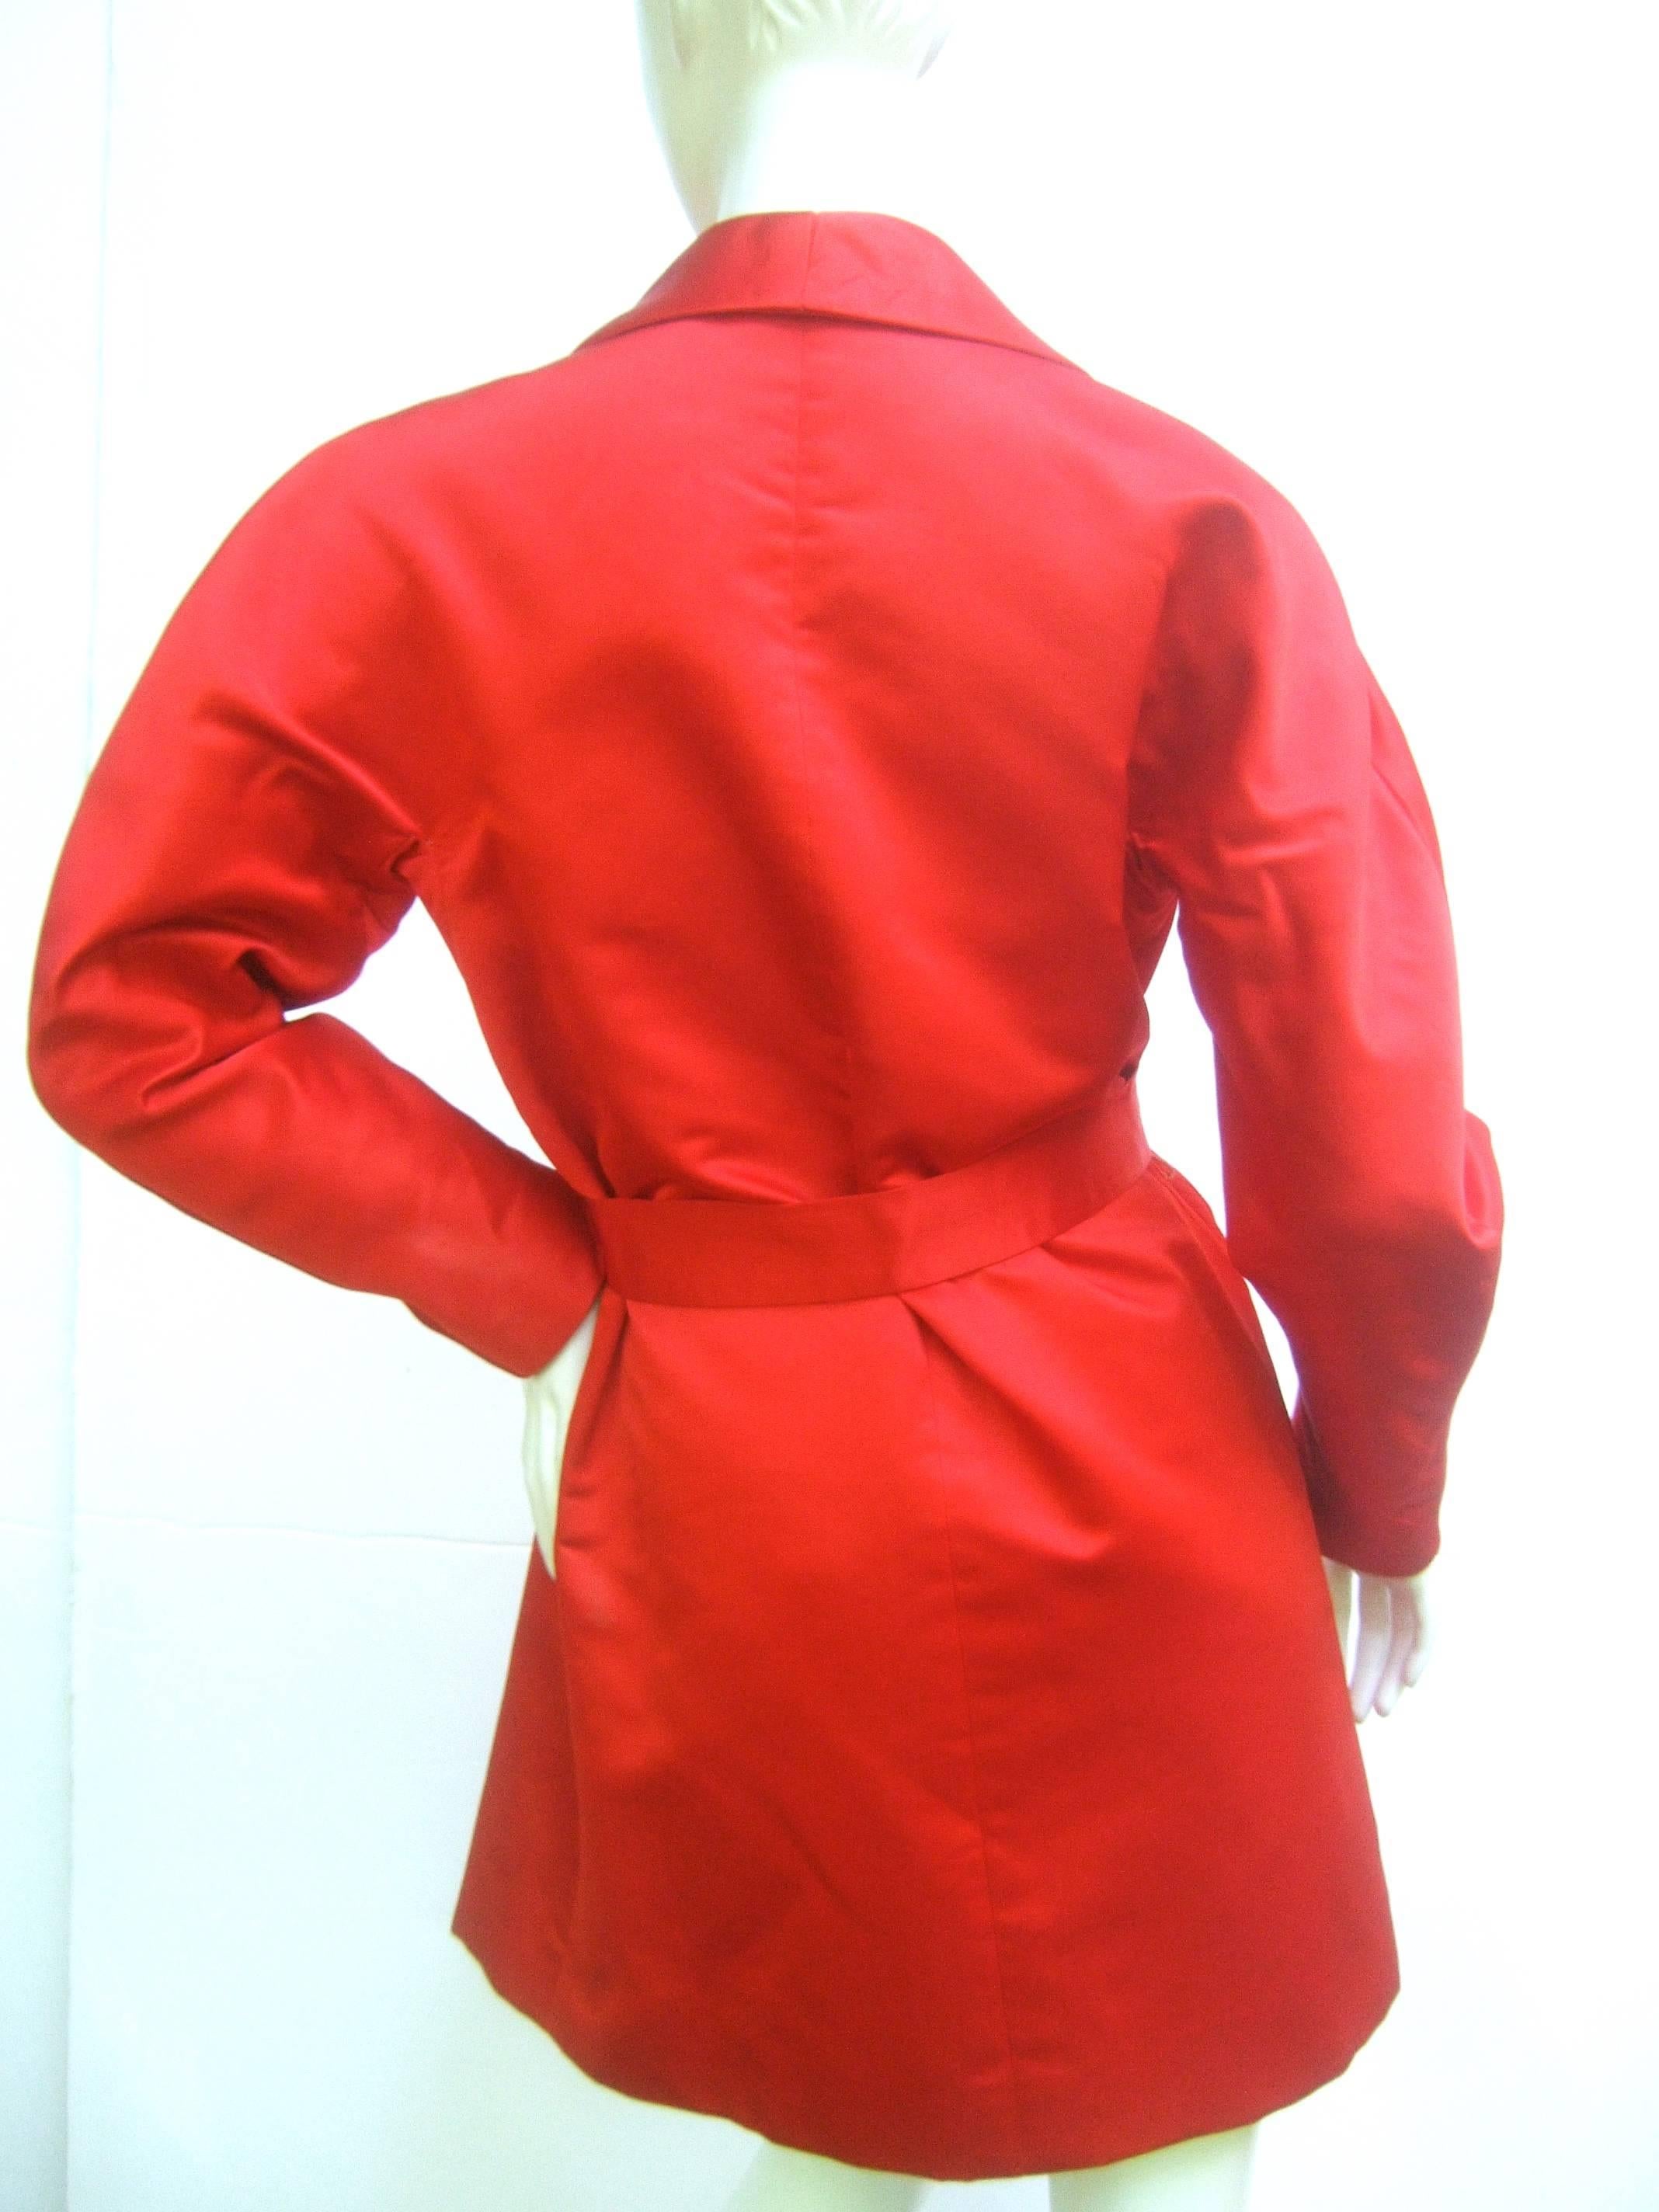 Cherry Red Halston Couture Belted Satin Jacket. 1970's. Studio 54. 1